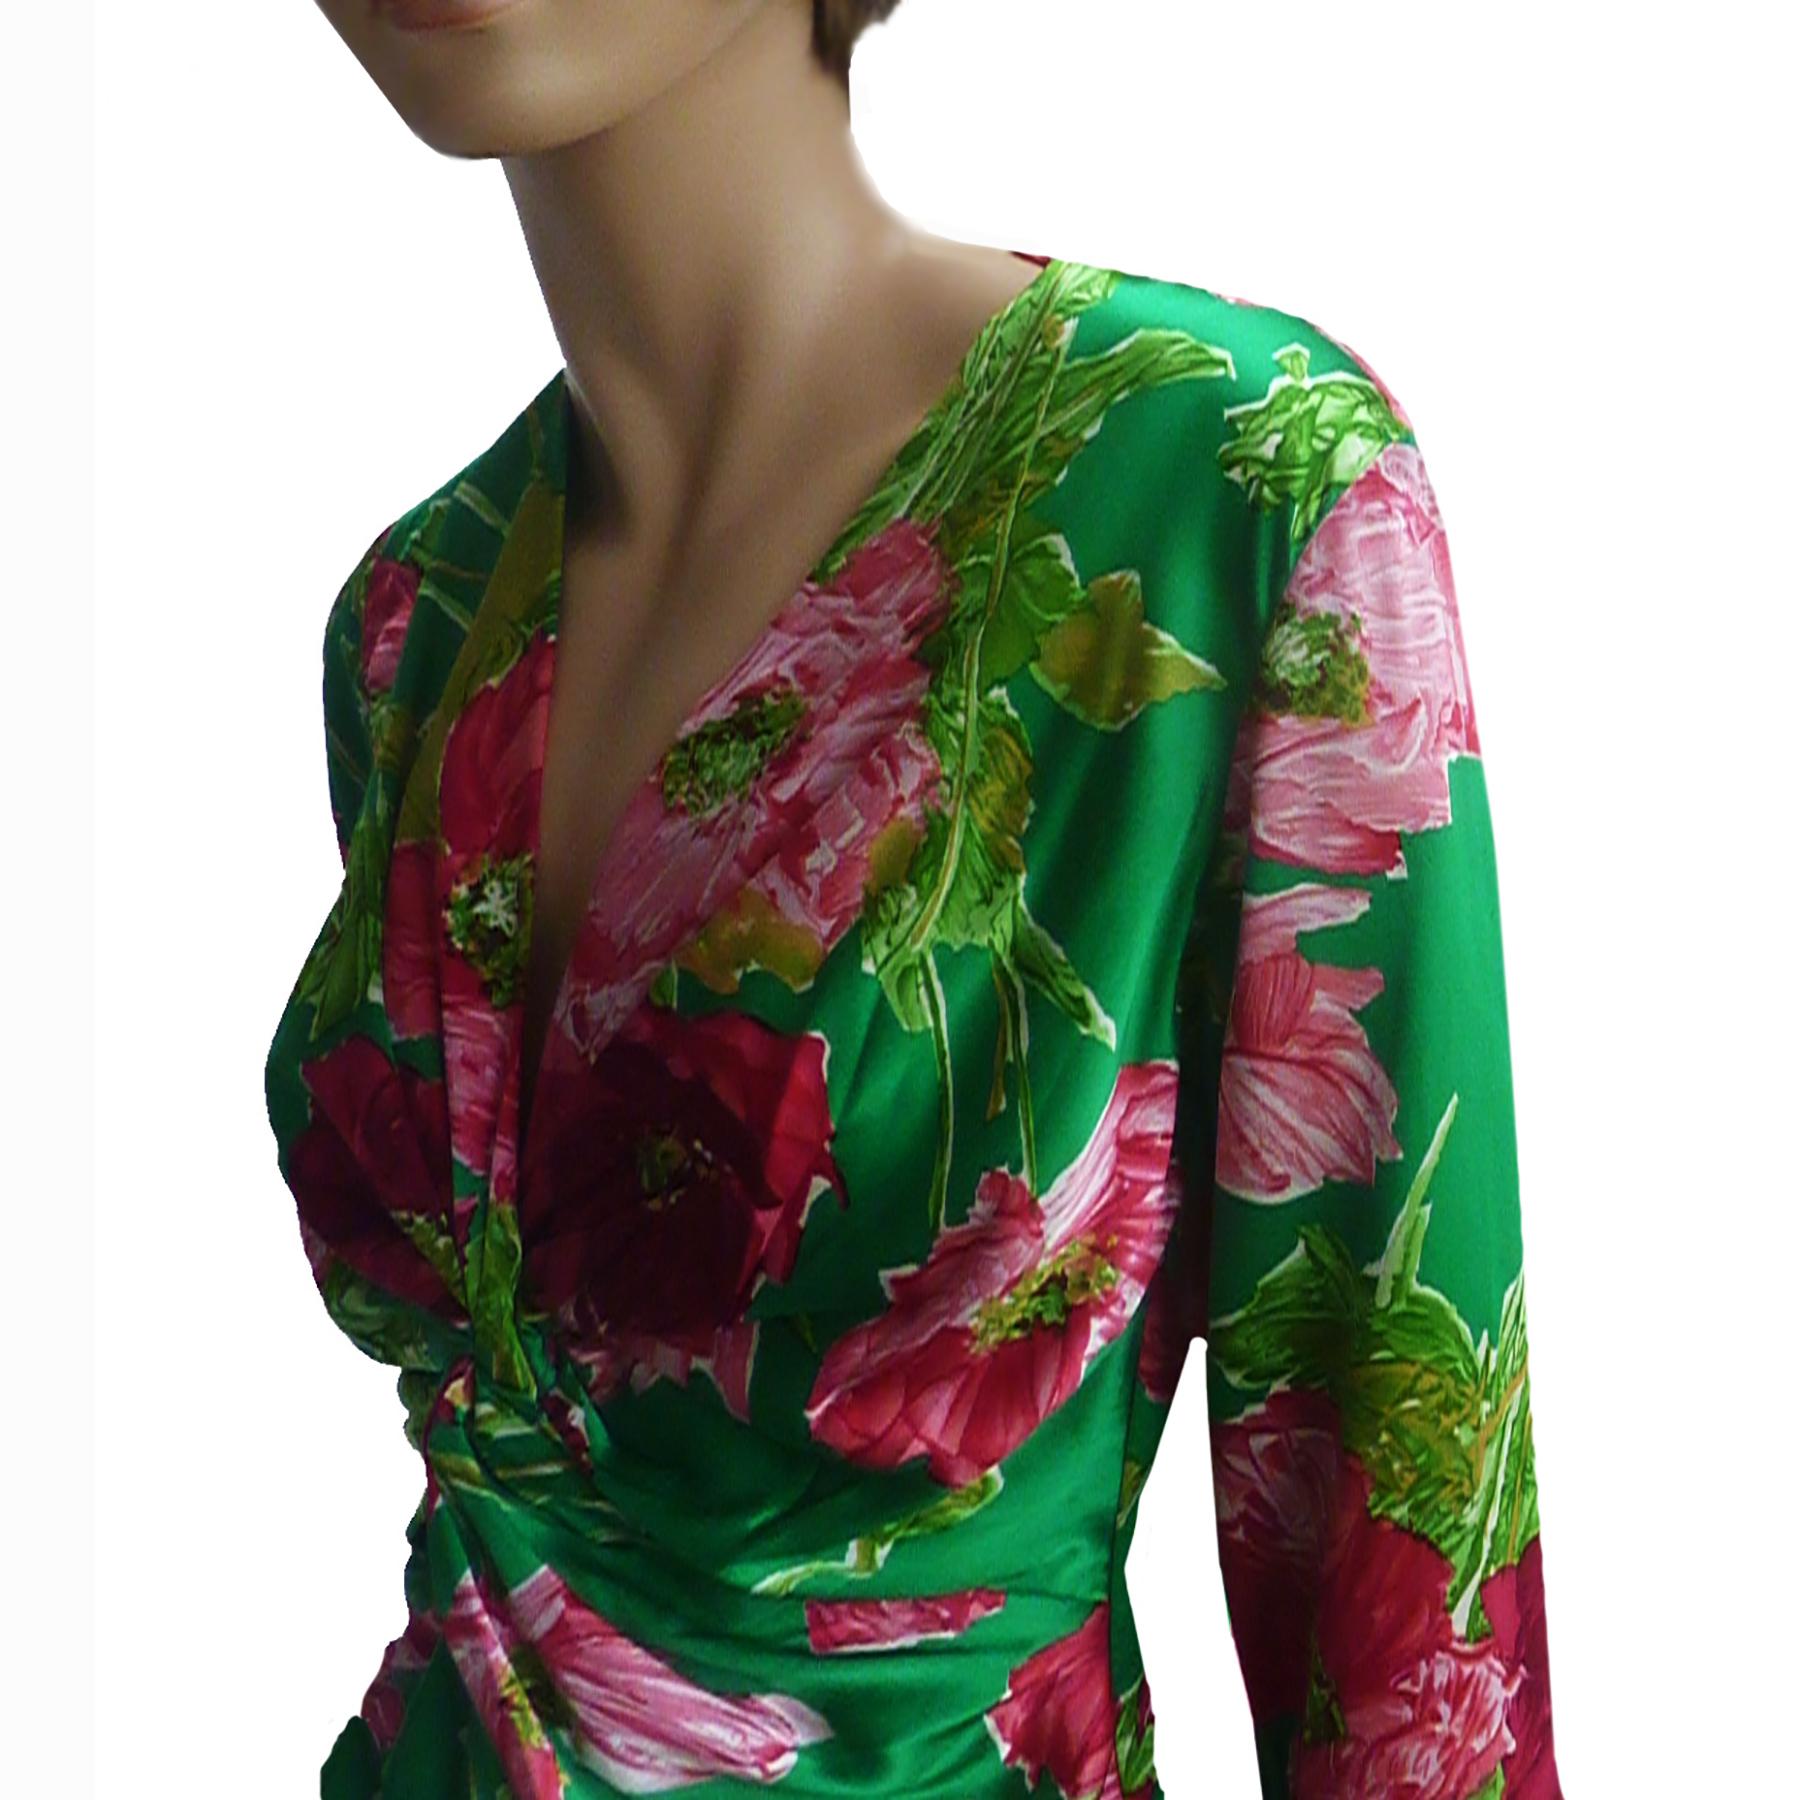 100% luxurious silk double charmeuse twist front dress.
Discreet tulip slit at center front.
Invisible side zipper closing.
Made in France.
FLORA KUNG silk items are made with the highest quality long-filament 100% silk yarn which produces a buttery